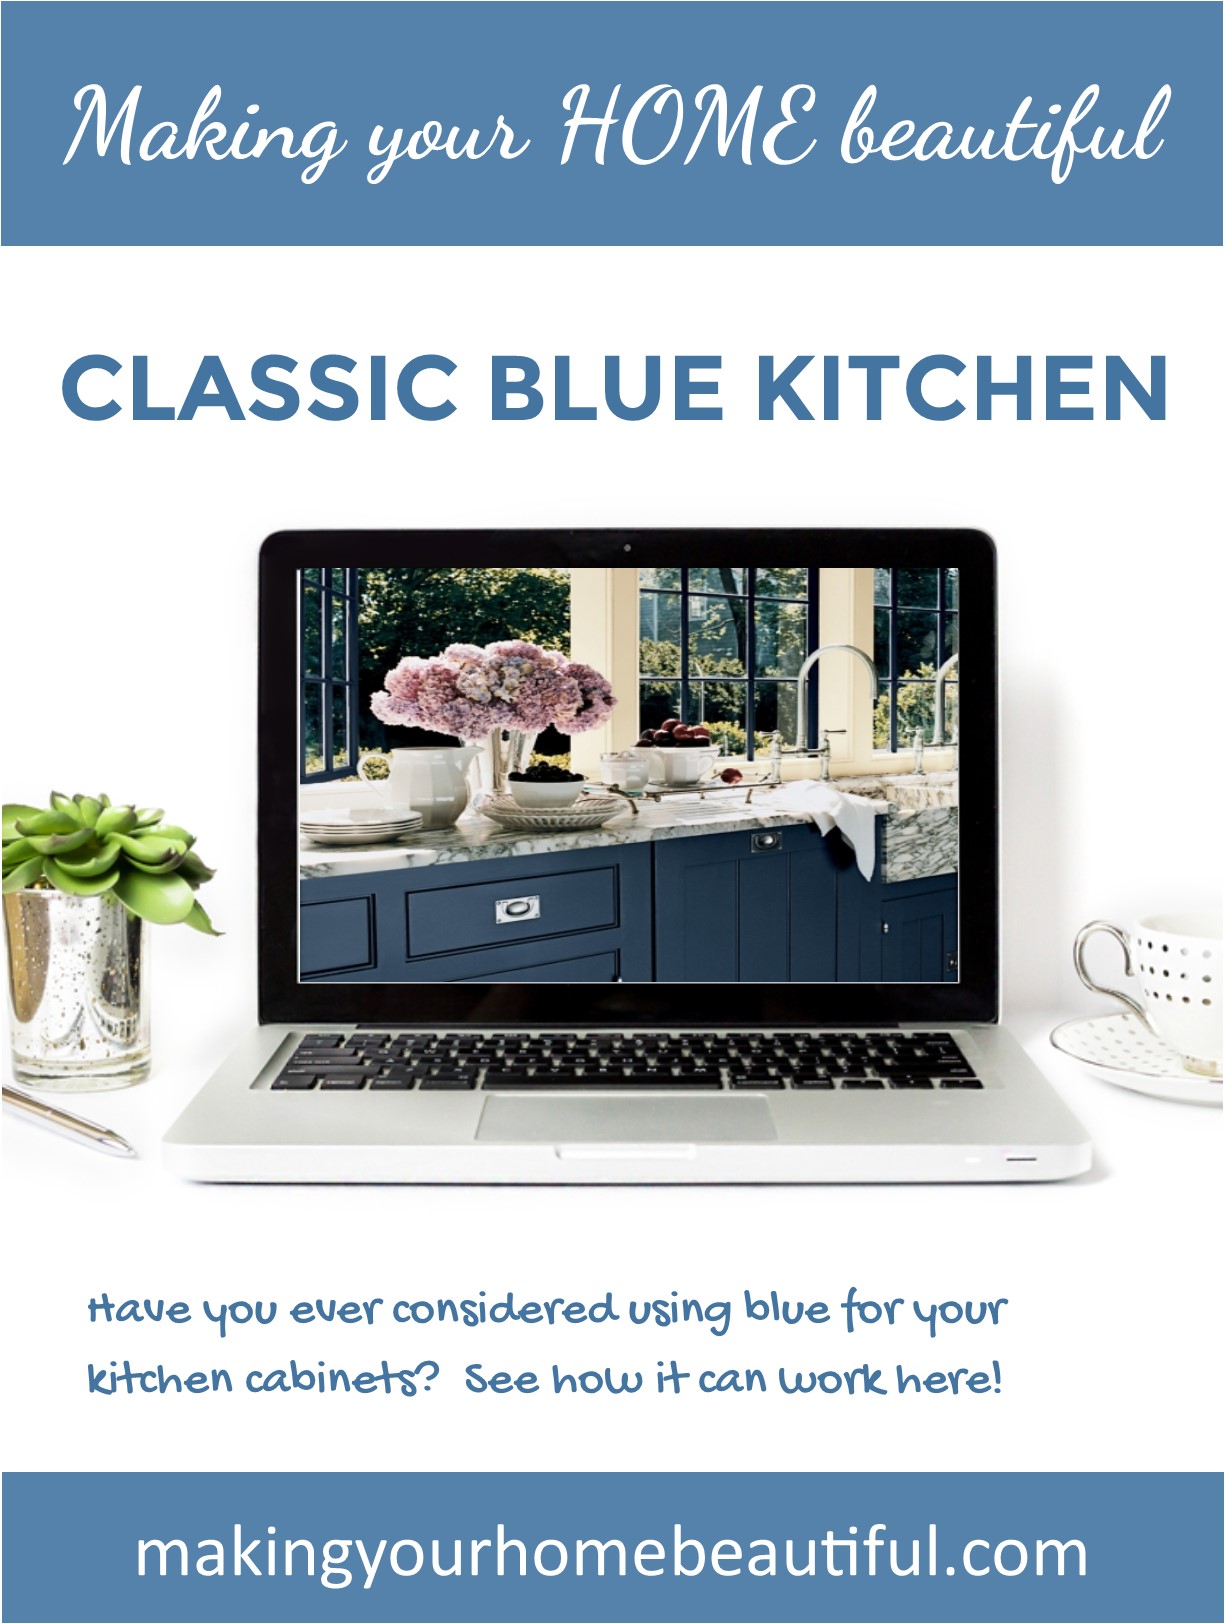 Have you ever considered using blue for your kitchen cabinetry